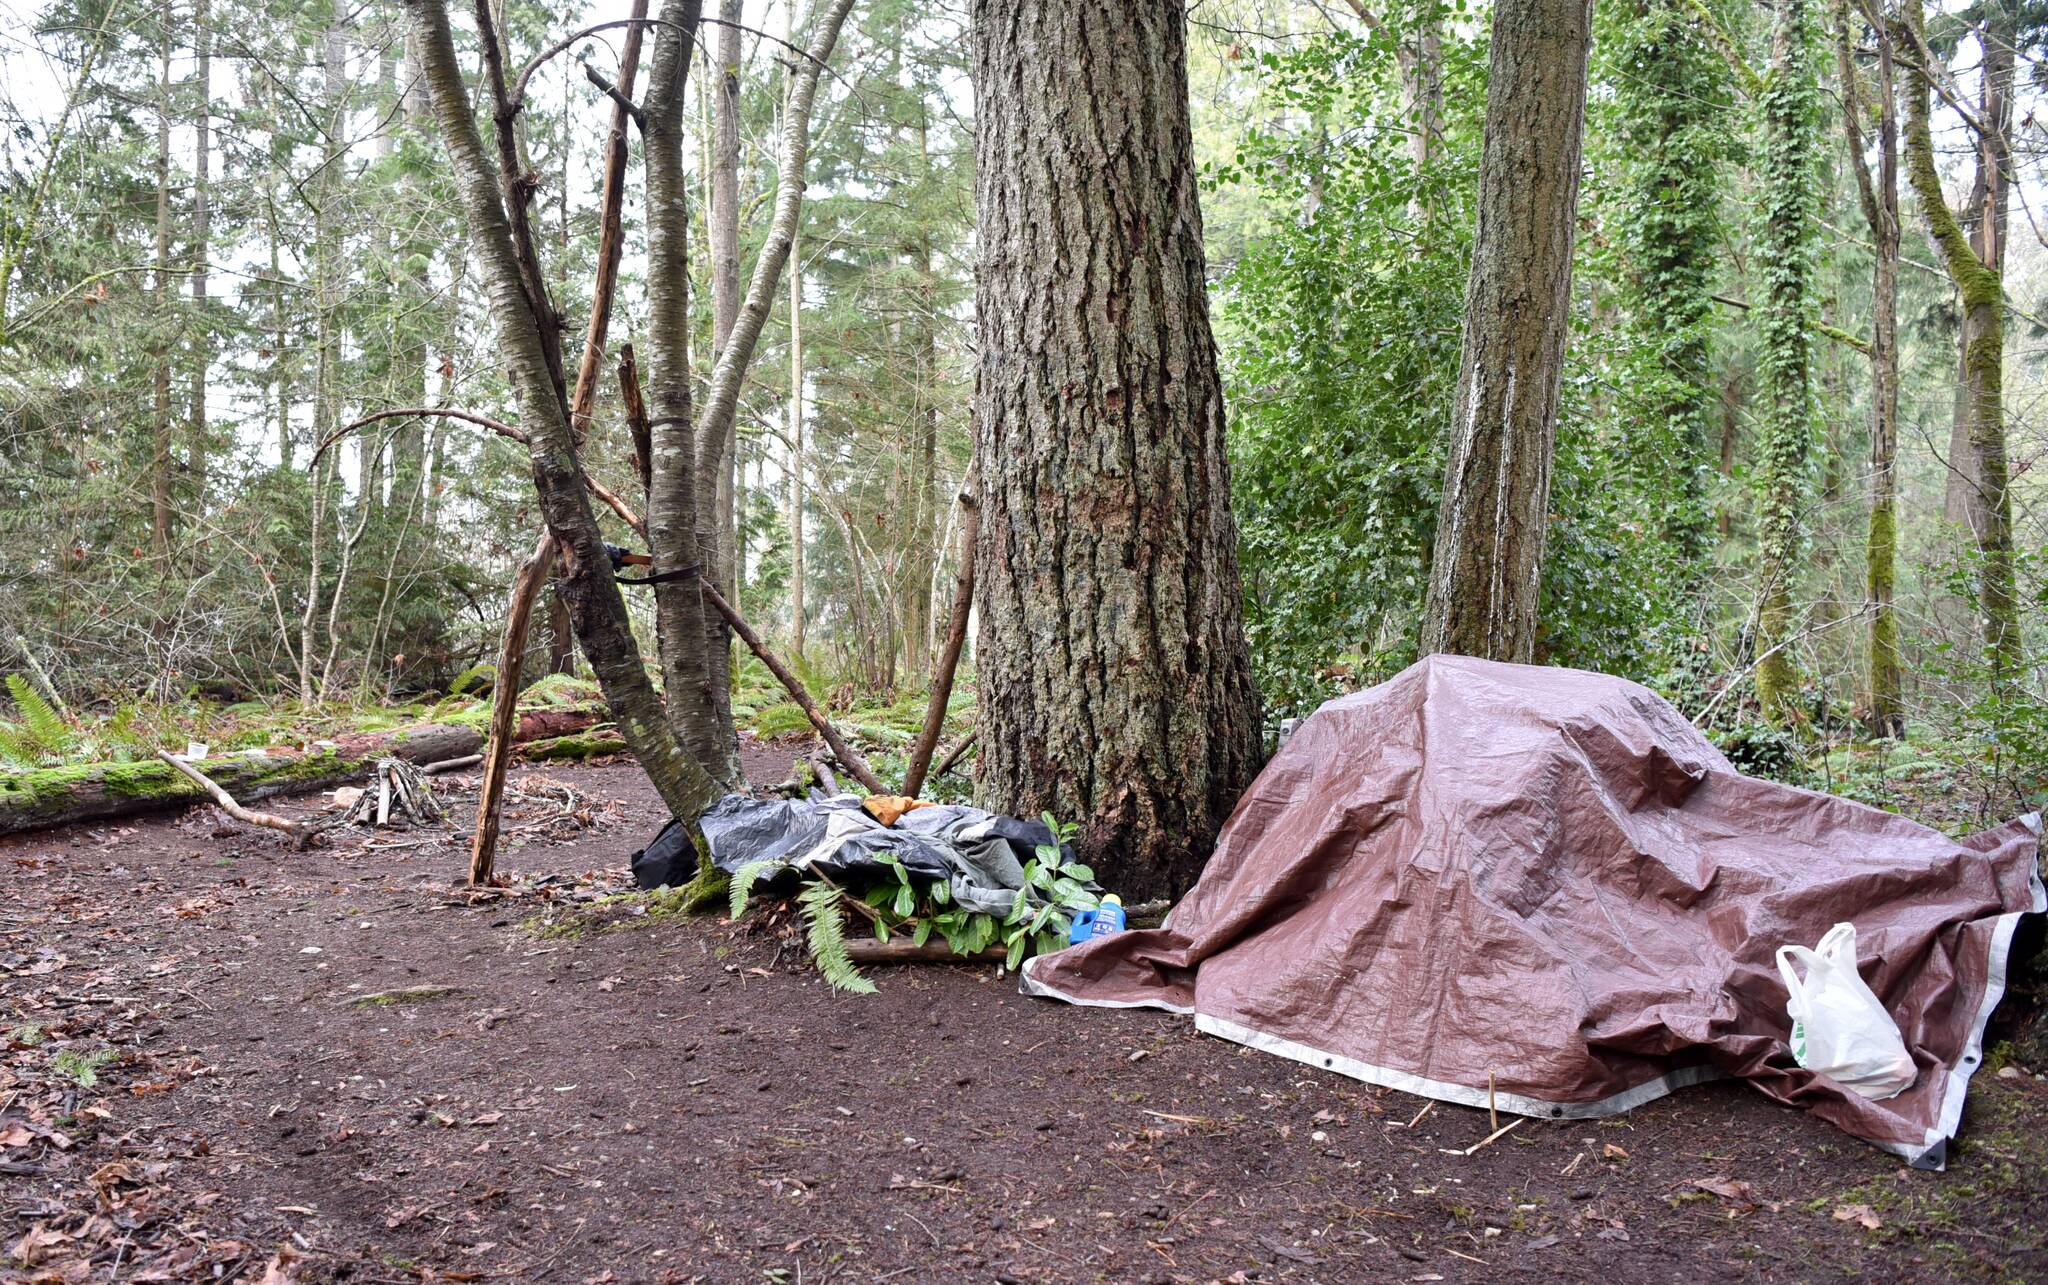 A tidy encampment found at a park in Poulsbo.